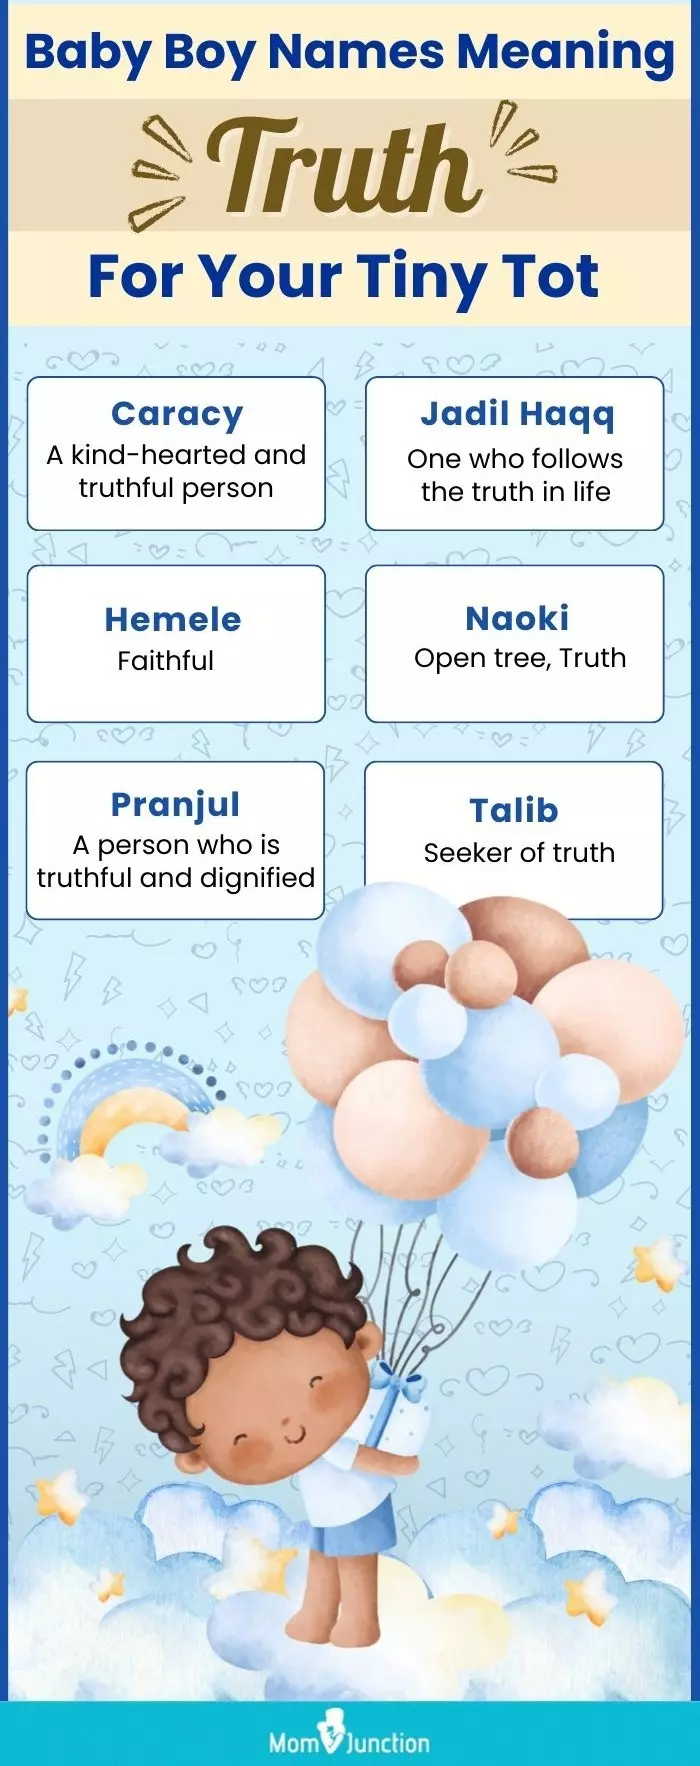 baby boy names meaning truth for your tiny tot(infographic)